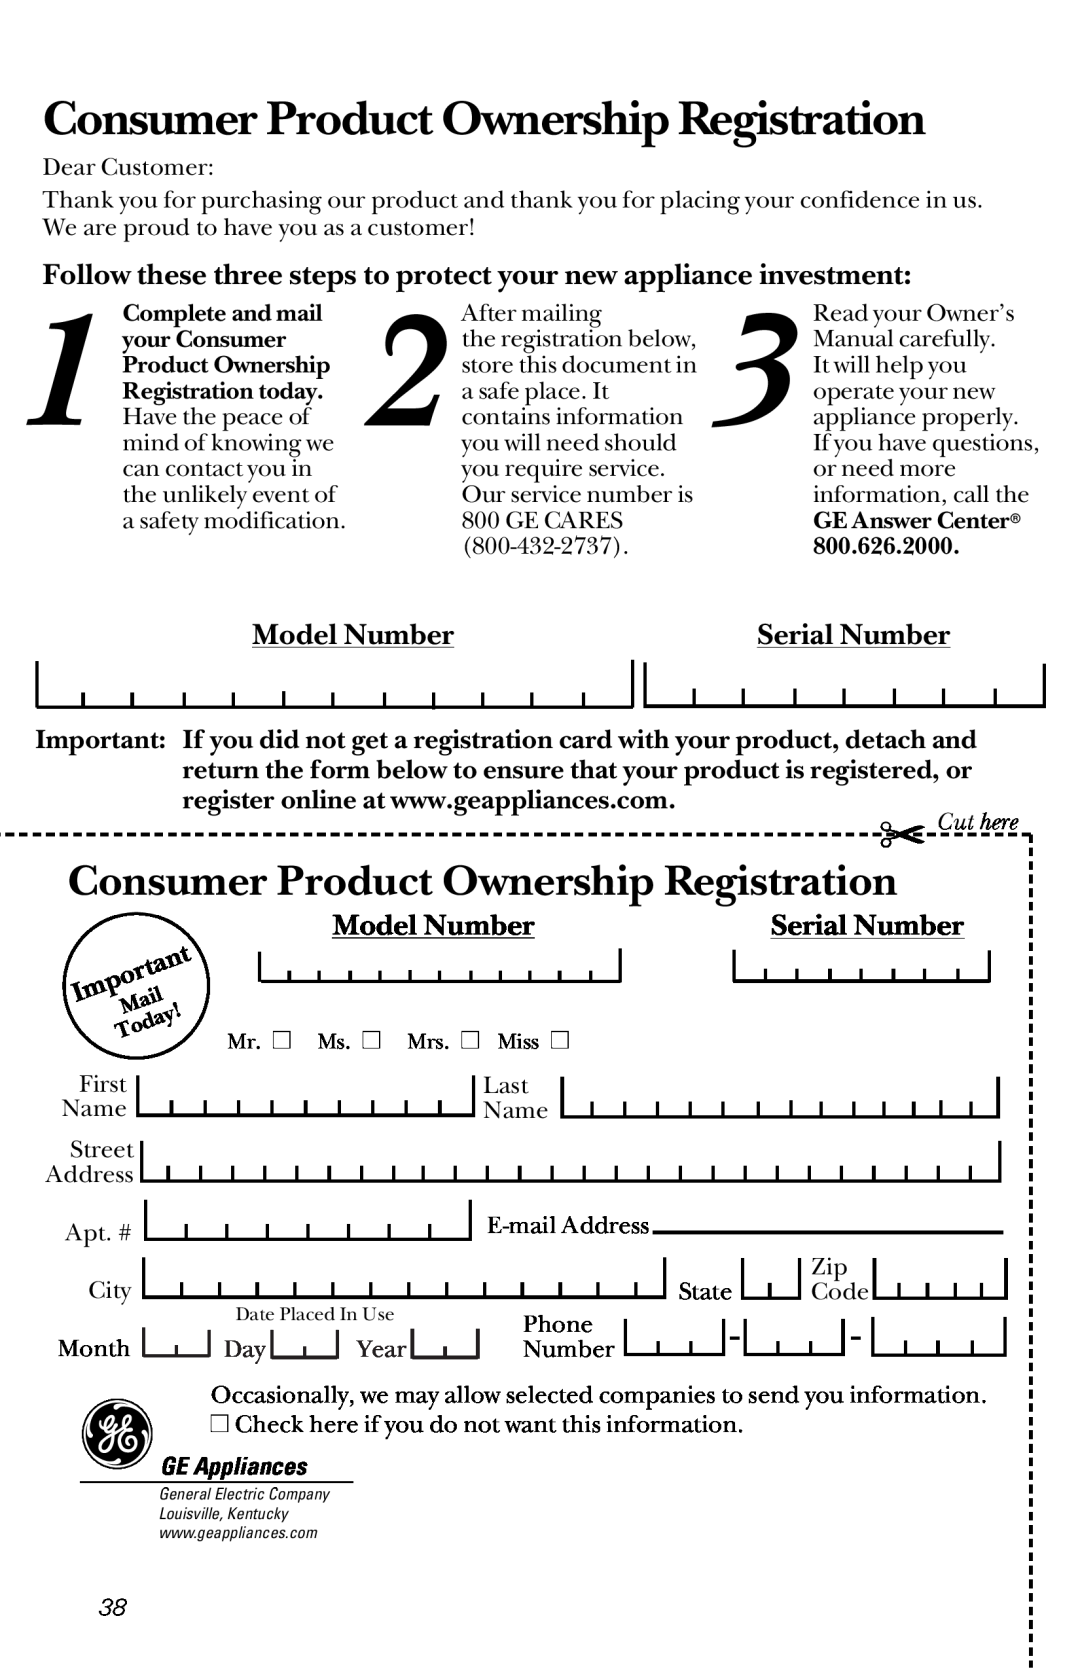 GE JE1340WC Consumer Product Ownership Registration, Follow these three steps to protect your new appliance investment 